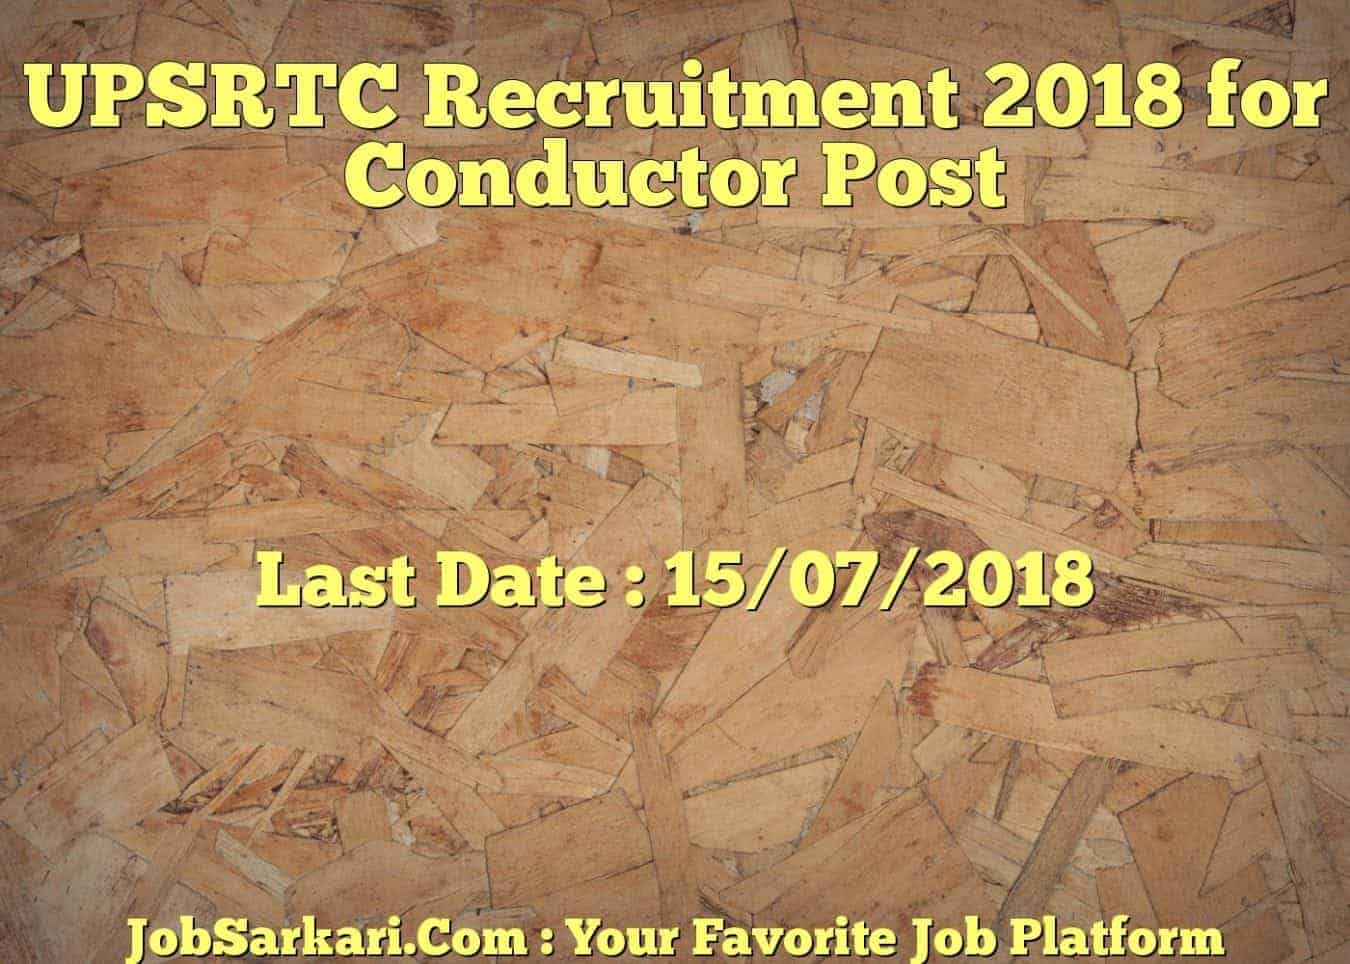 UPSRTC Recruitment 2018 for Conductor Post (Cancellation)